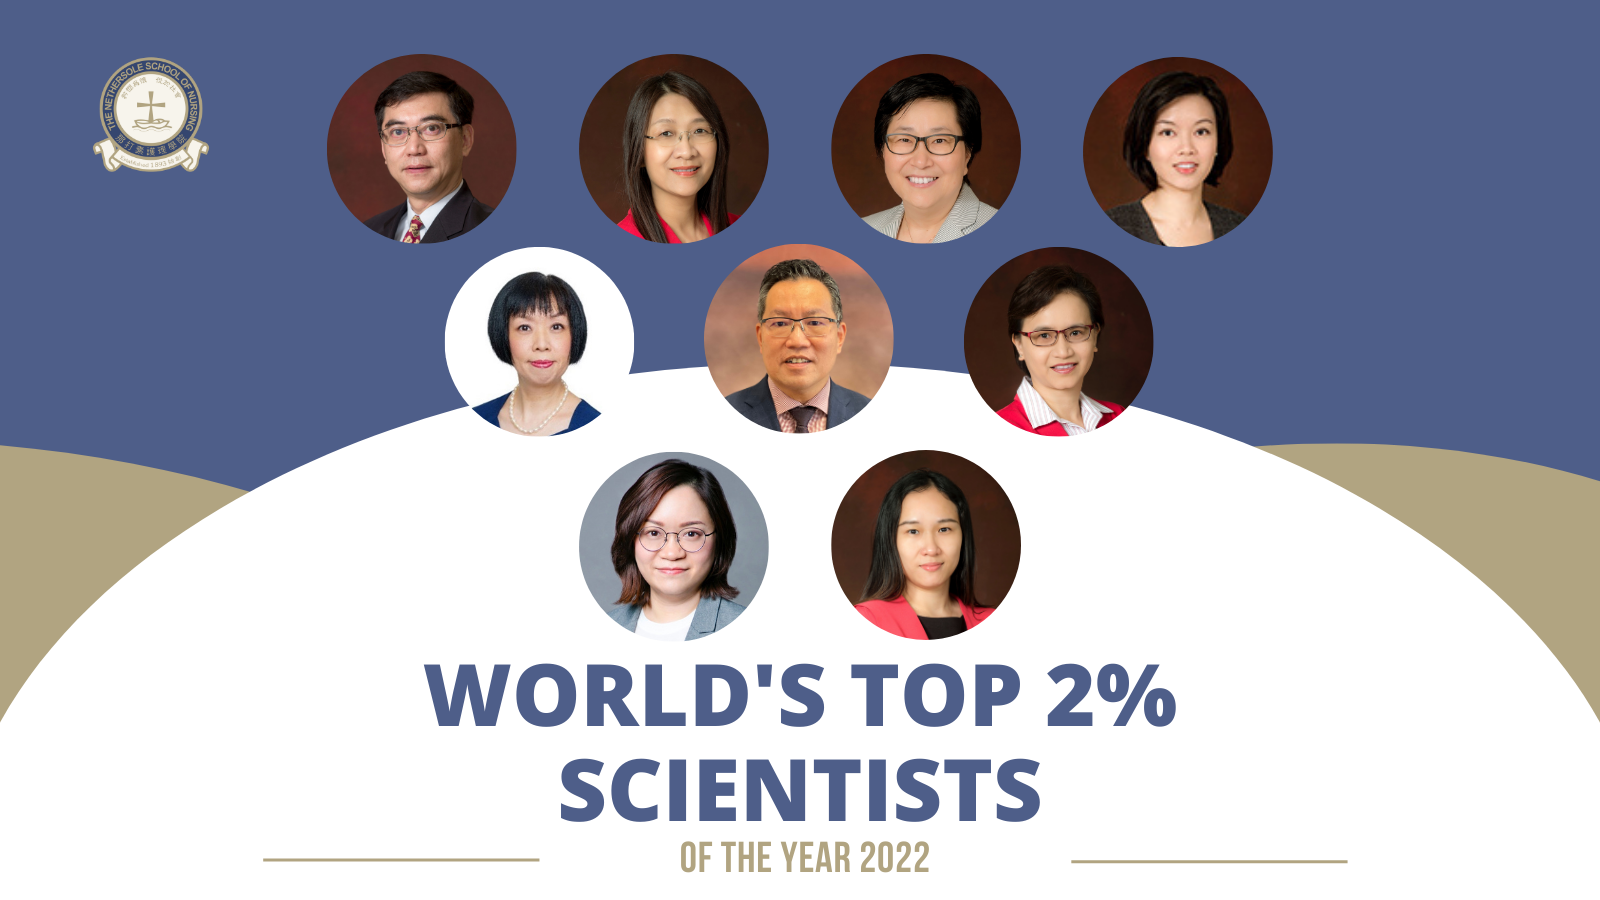 World’s Top 2% Scientists 2022